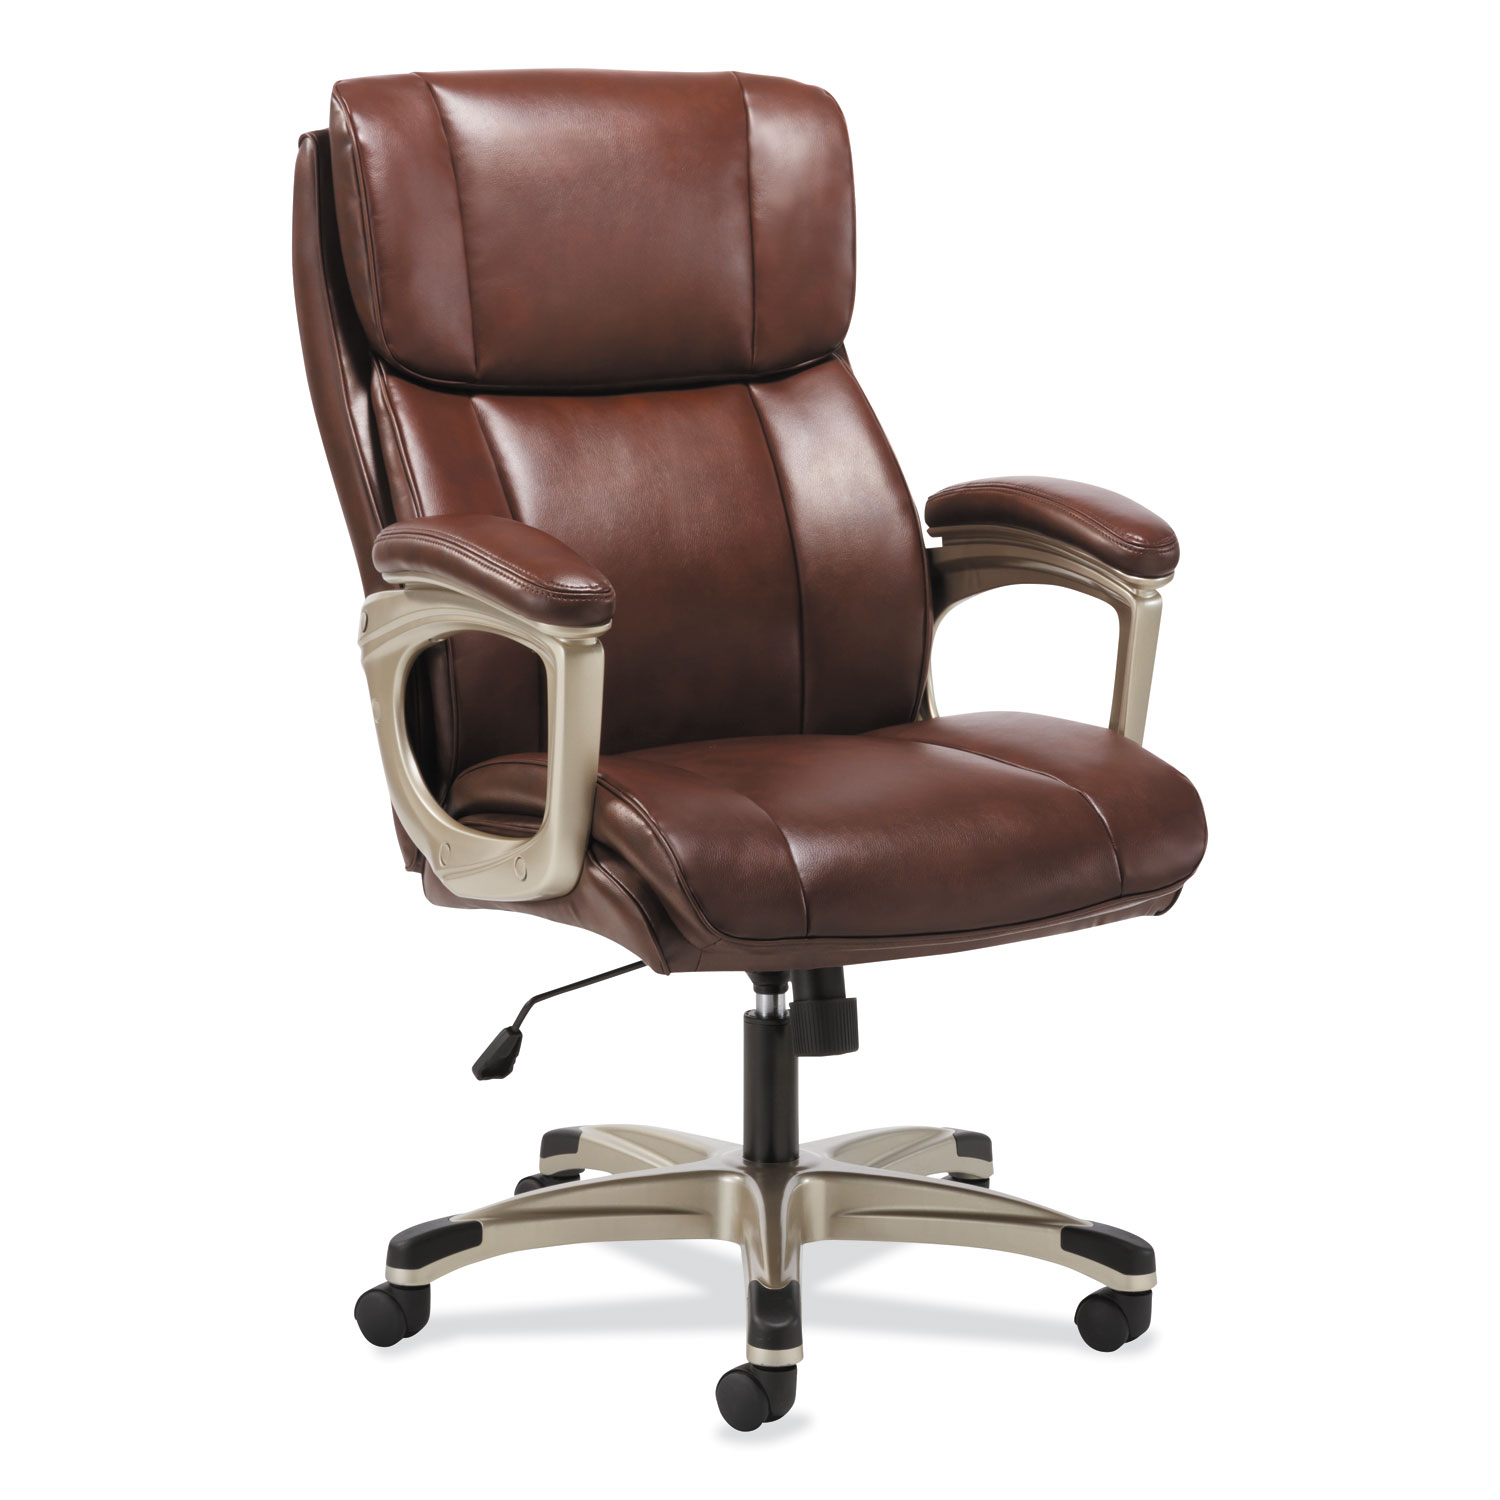  Sadie BSXVST316 3-Sixteen High-Back Executive Chair, Supports up to 250 lbs., Brown Seat/Brown Back, Chrome Base (BSXVST316) 